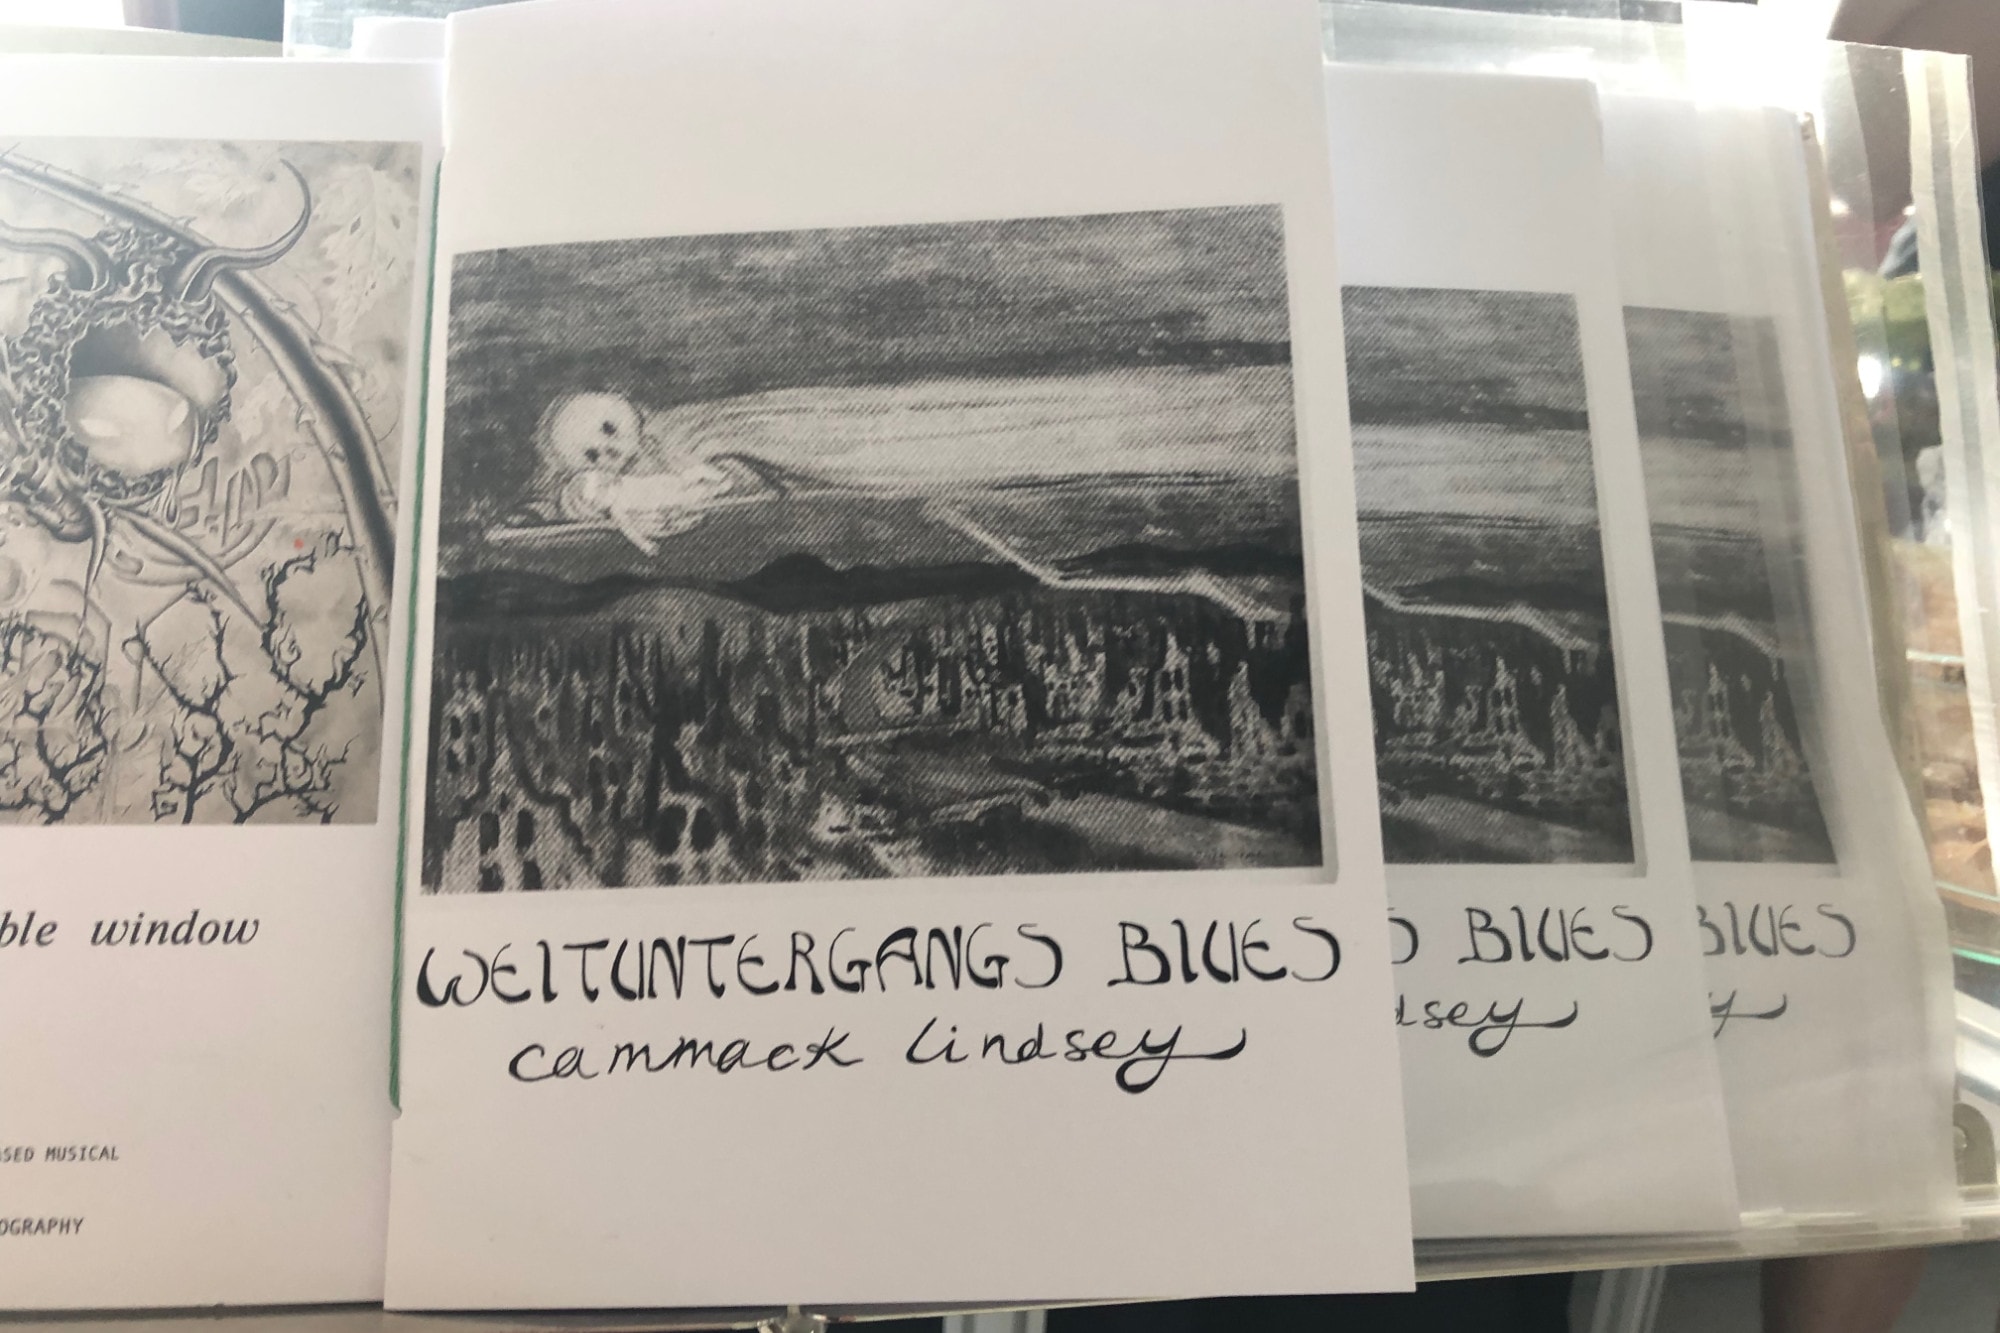 a set of prints on paper a form of a flying ghosts or skeleton and text: WEITUNTERGANGS BLUES Cammack Lindsey 